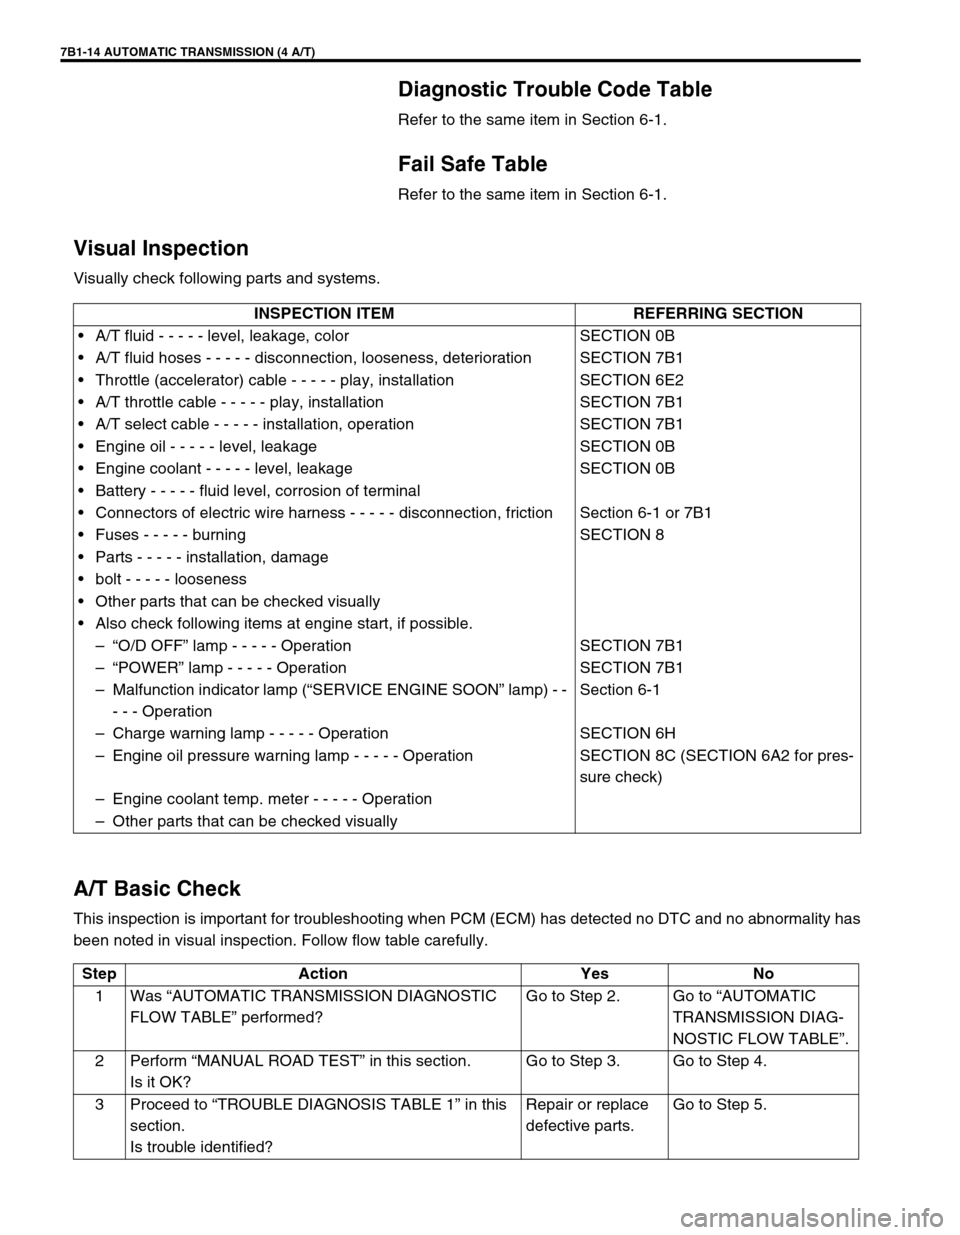 SUZUKI GRAND VITARA 1999 2.G User Guide 7B1-14 AUTOMATIC TRANSMISSION (4 A/T)
Diagnostic Trouble Code Table
Refer to the same item in Section 6-1.
Fail Safe Table
Refer to the same item in Section 6-1.
Visual Inspection
Visually check follo